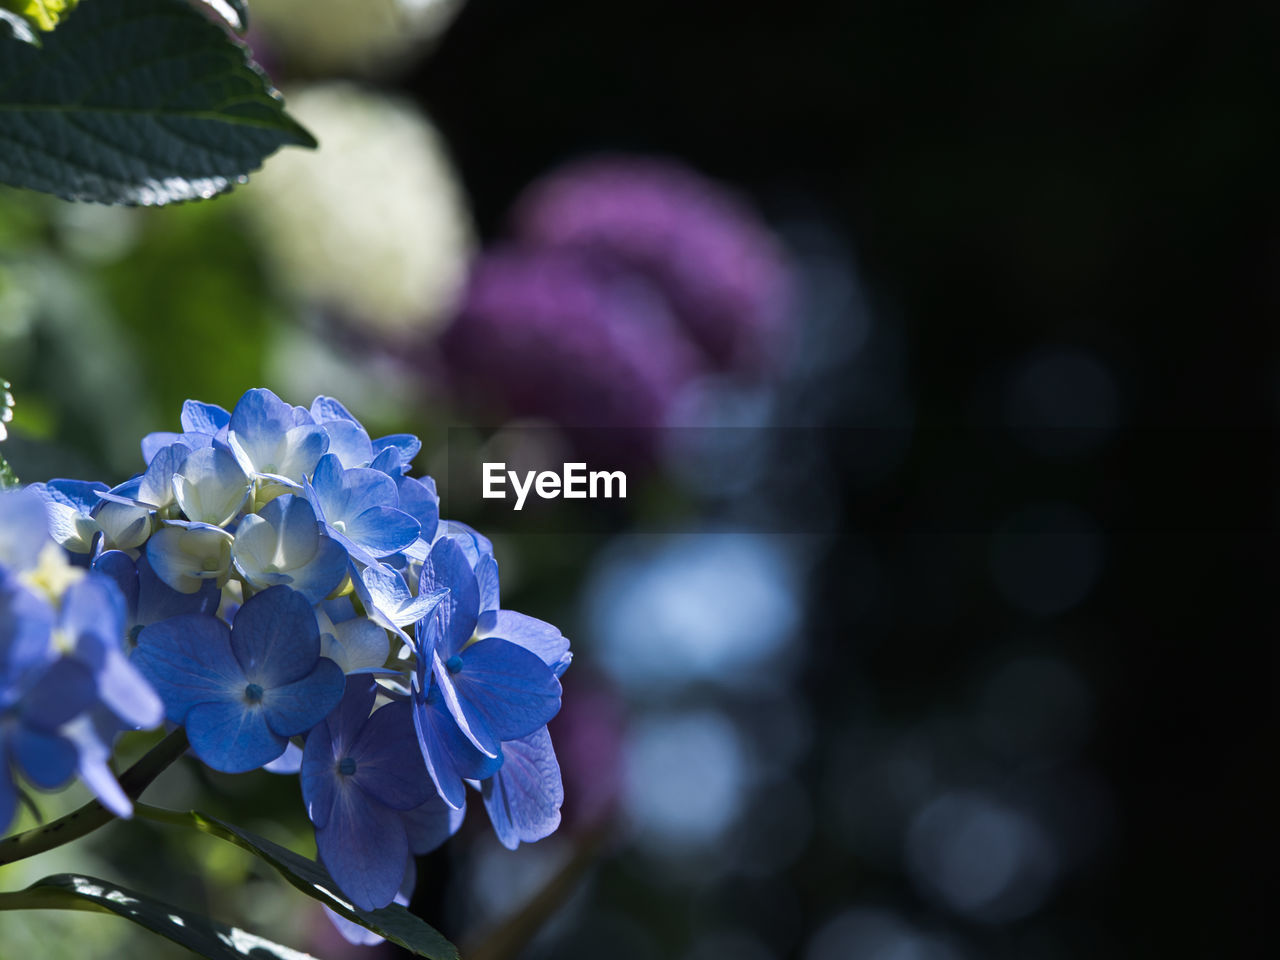 flower, plant, flowering plant, blue, beauty in nature, freshness, nature, purple, macro photography, close-up, growth, plant part, blossom, leaf, petal, fragility, focus on foreground, inflorescence, lilac, flower head, no people, outdoors, springtime, hydrangea, botany, selective focus, summer, food and drink